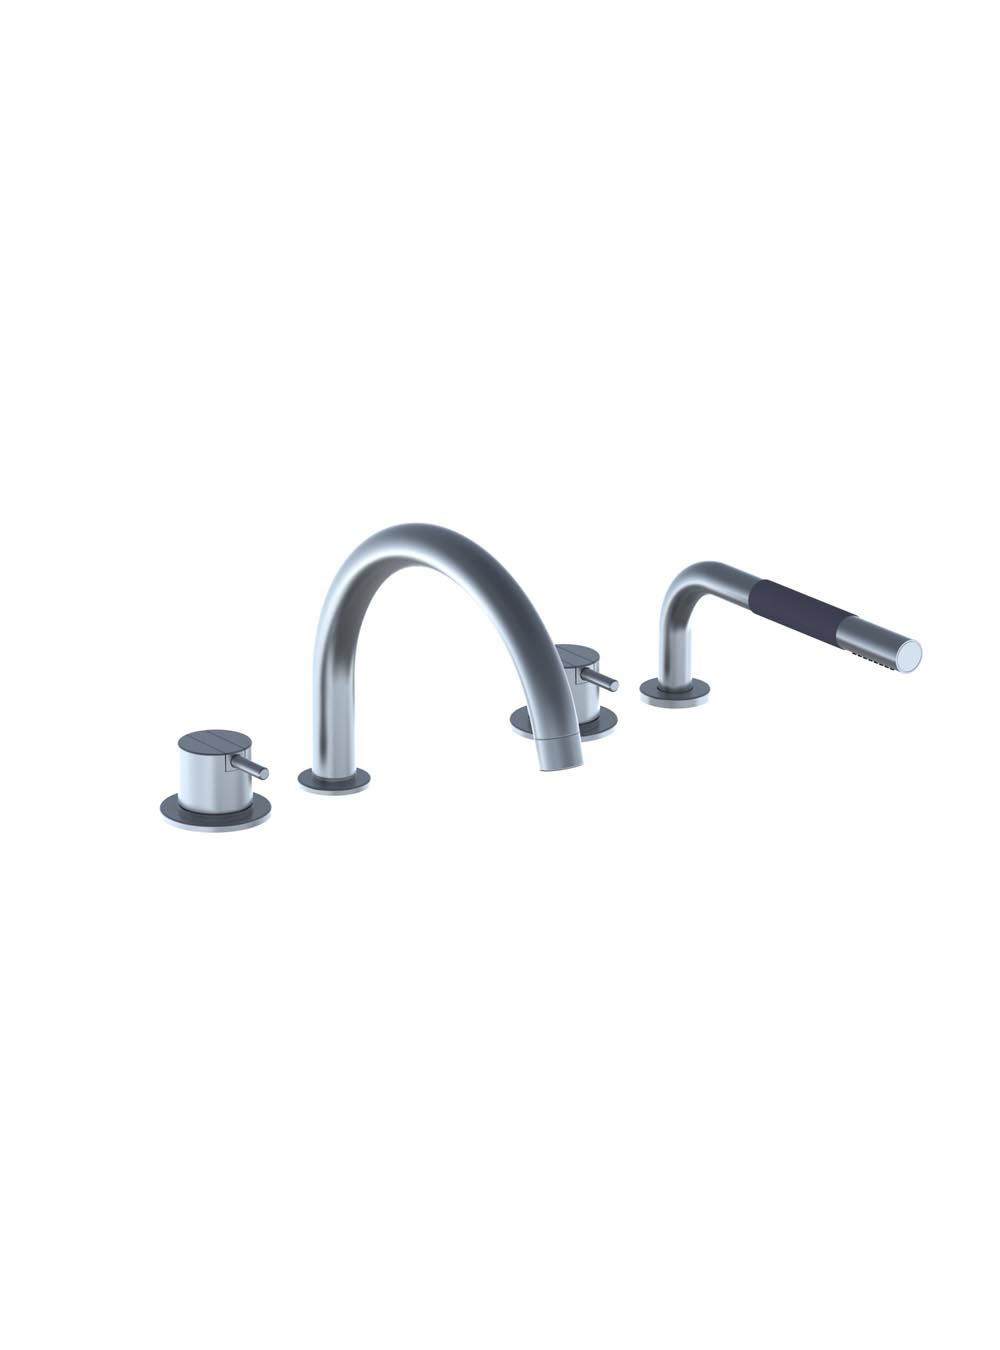 SC12: One-handle mixer 2x2500 with swivel spout 090E and hand shower T1.